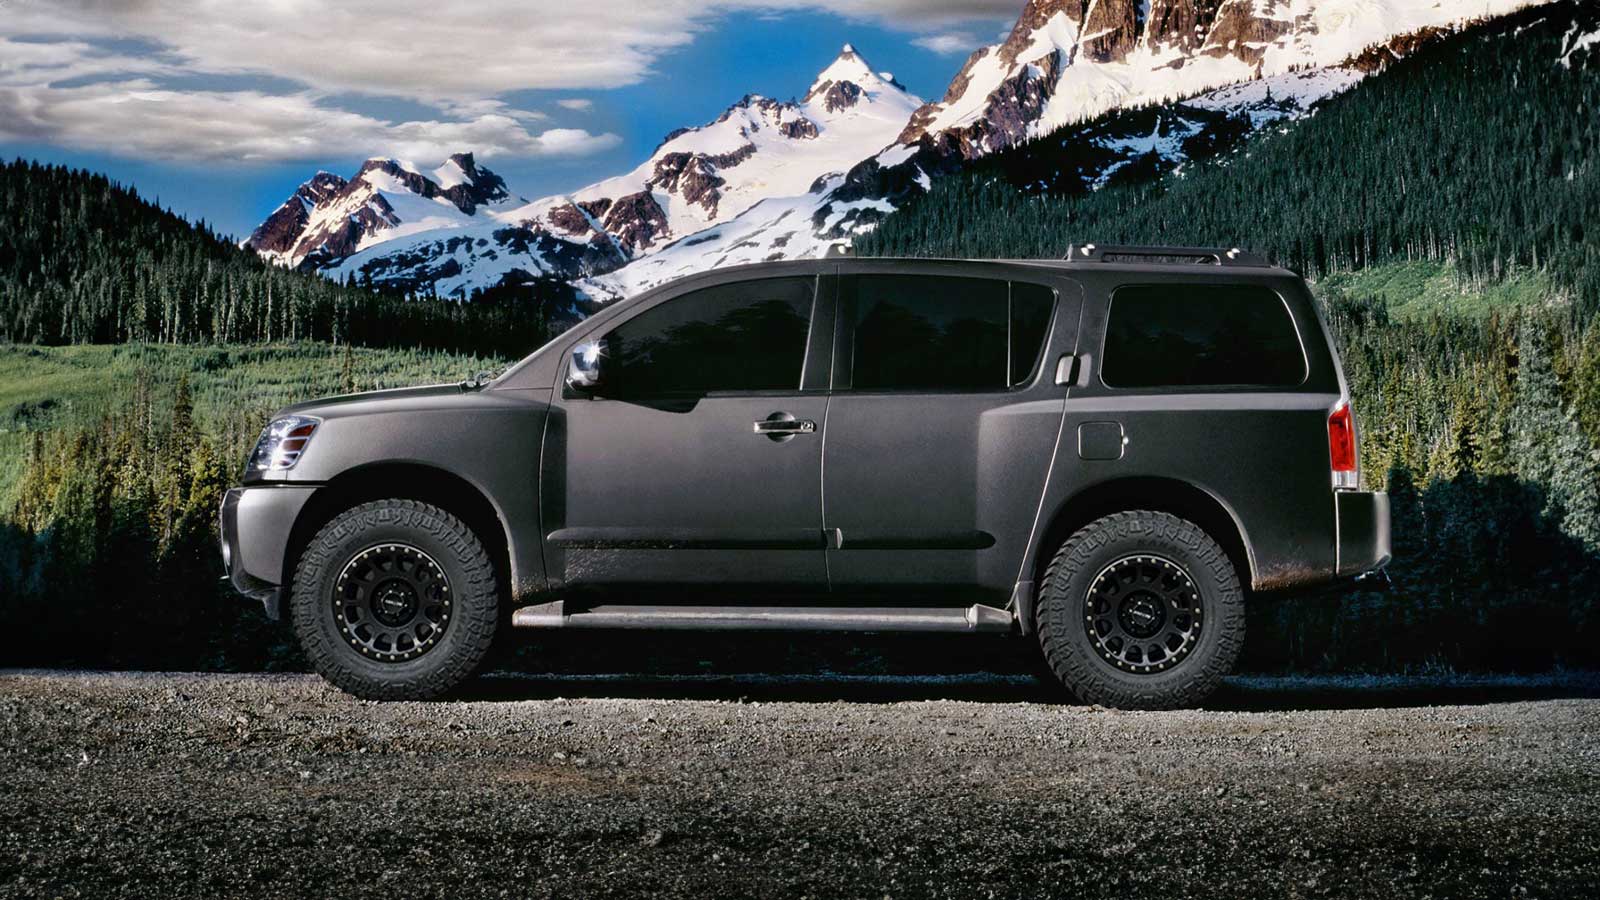 Armada Parts Your source for the best Nissan Armada off-road parts & upgrades